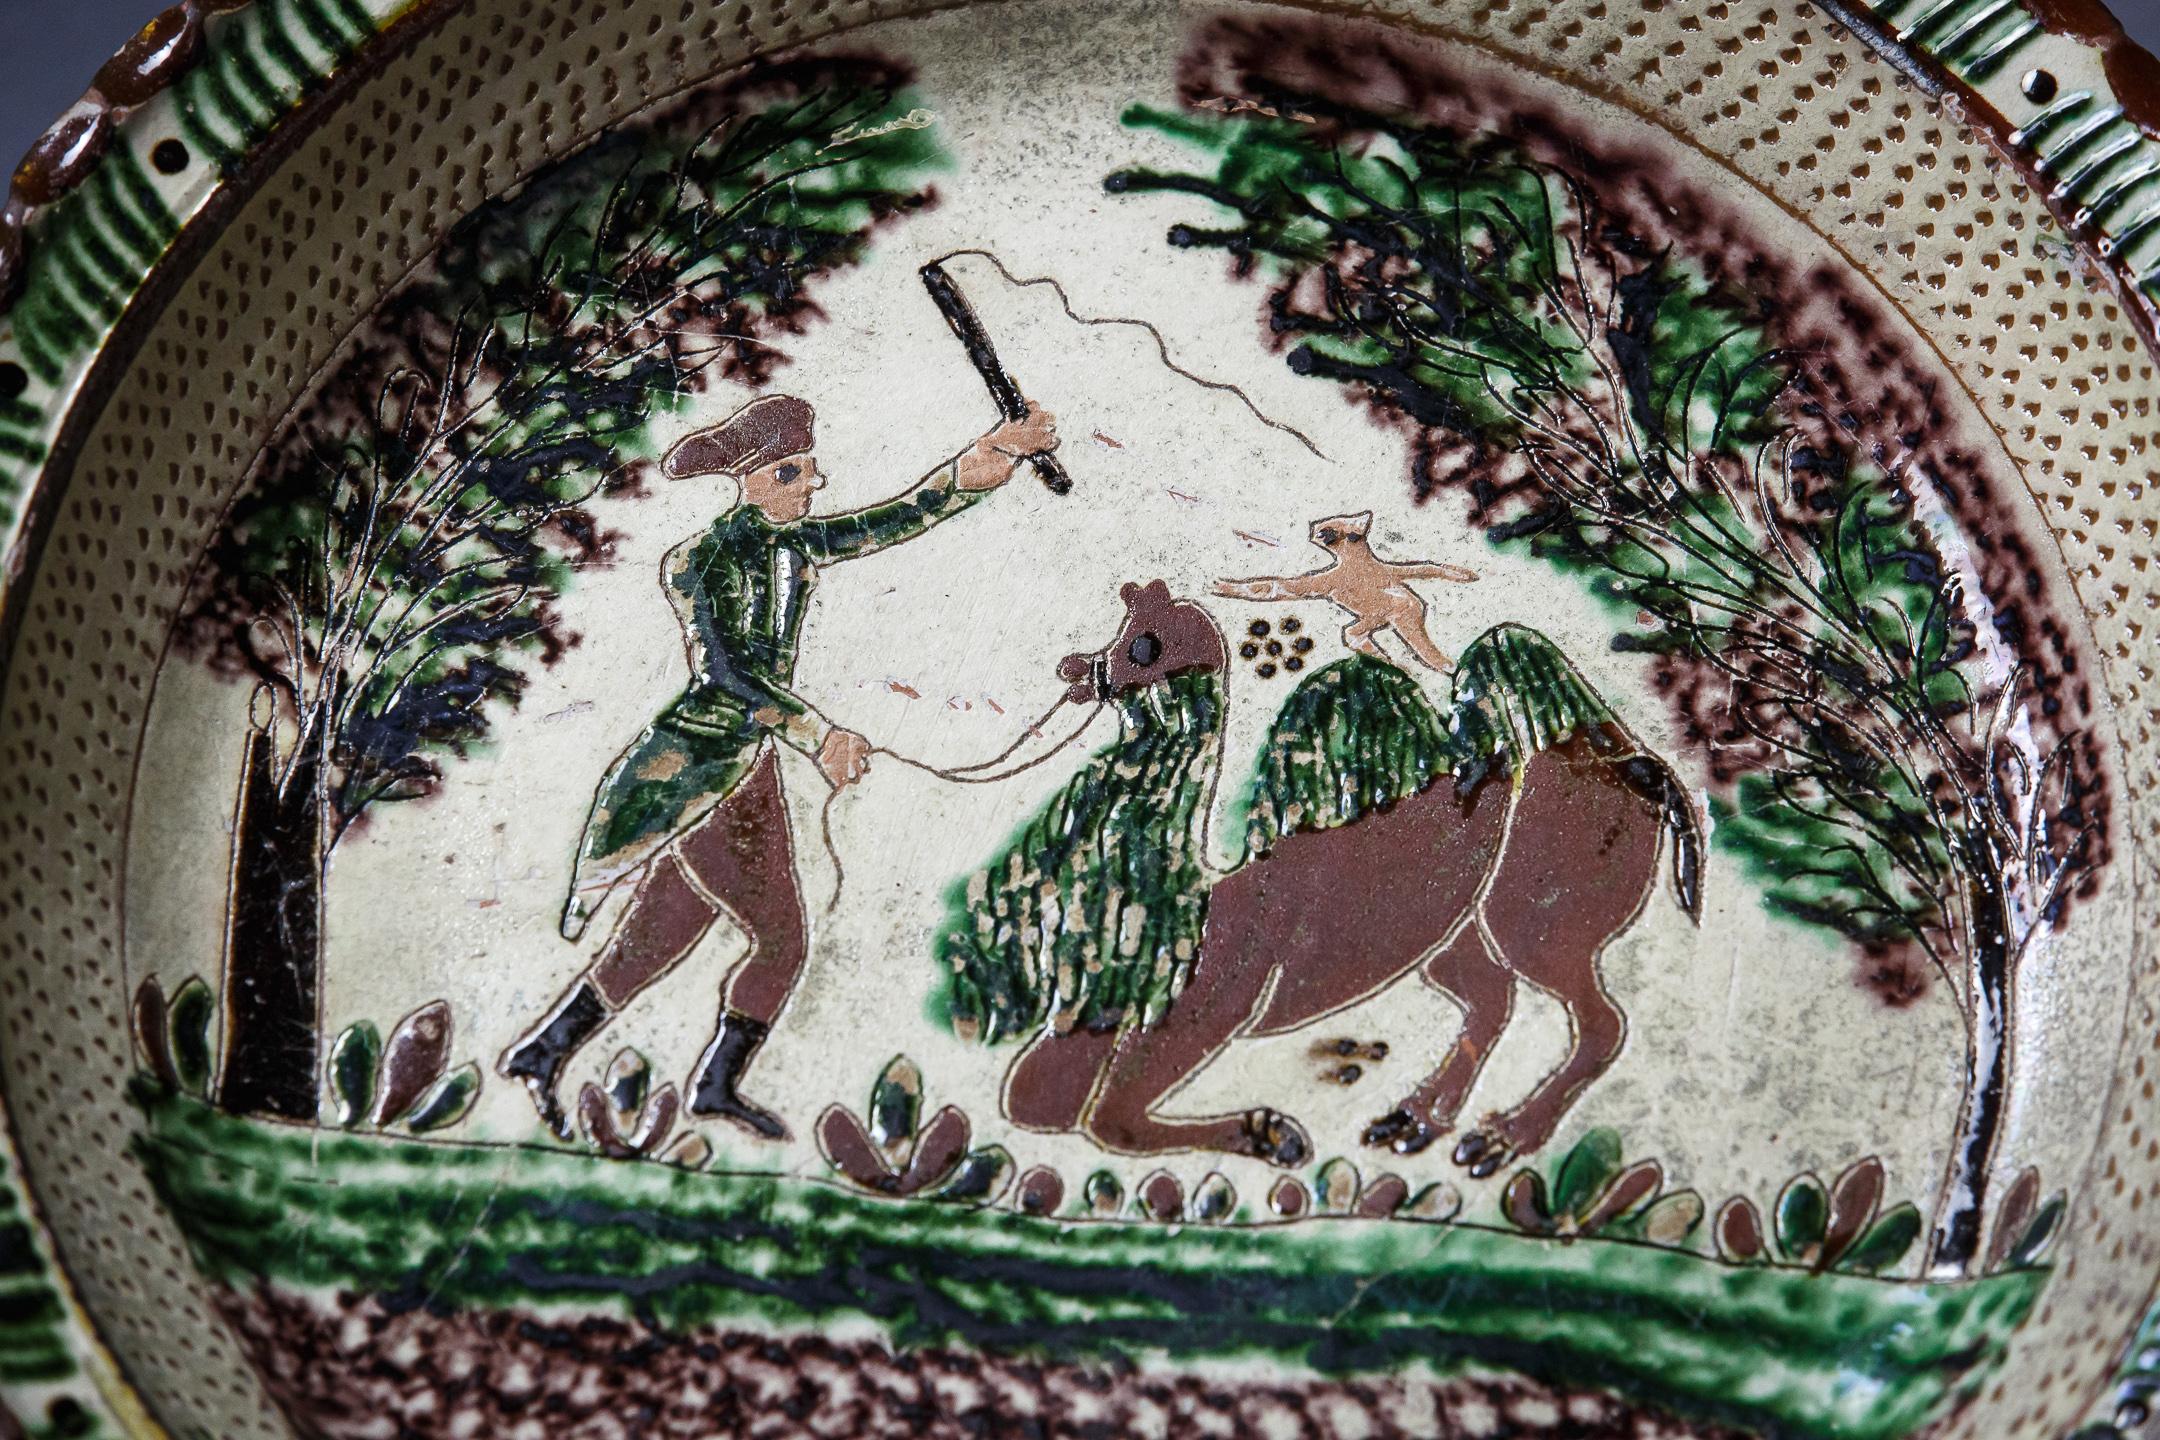 Early 19th Century Alsace Slipware Plate In Good Condition For Sale In Pease pottage, West Sussex